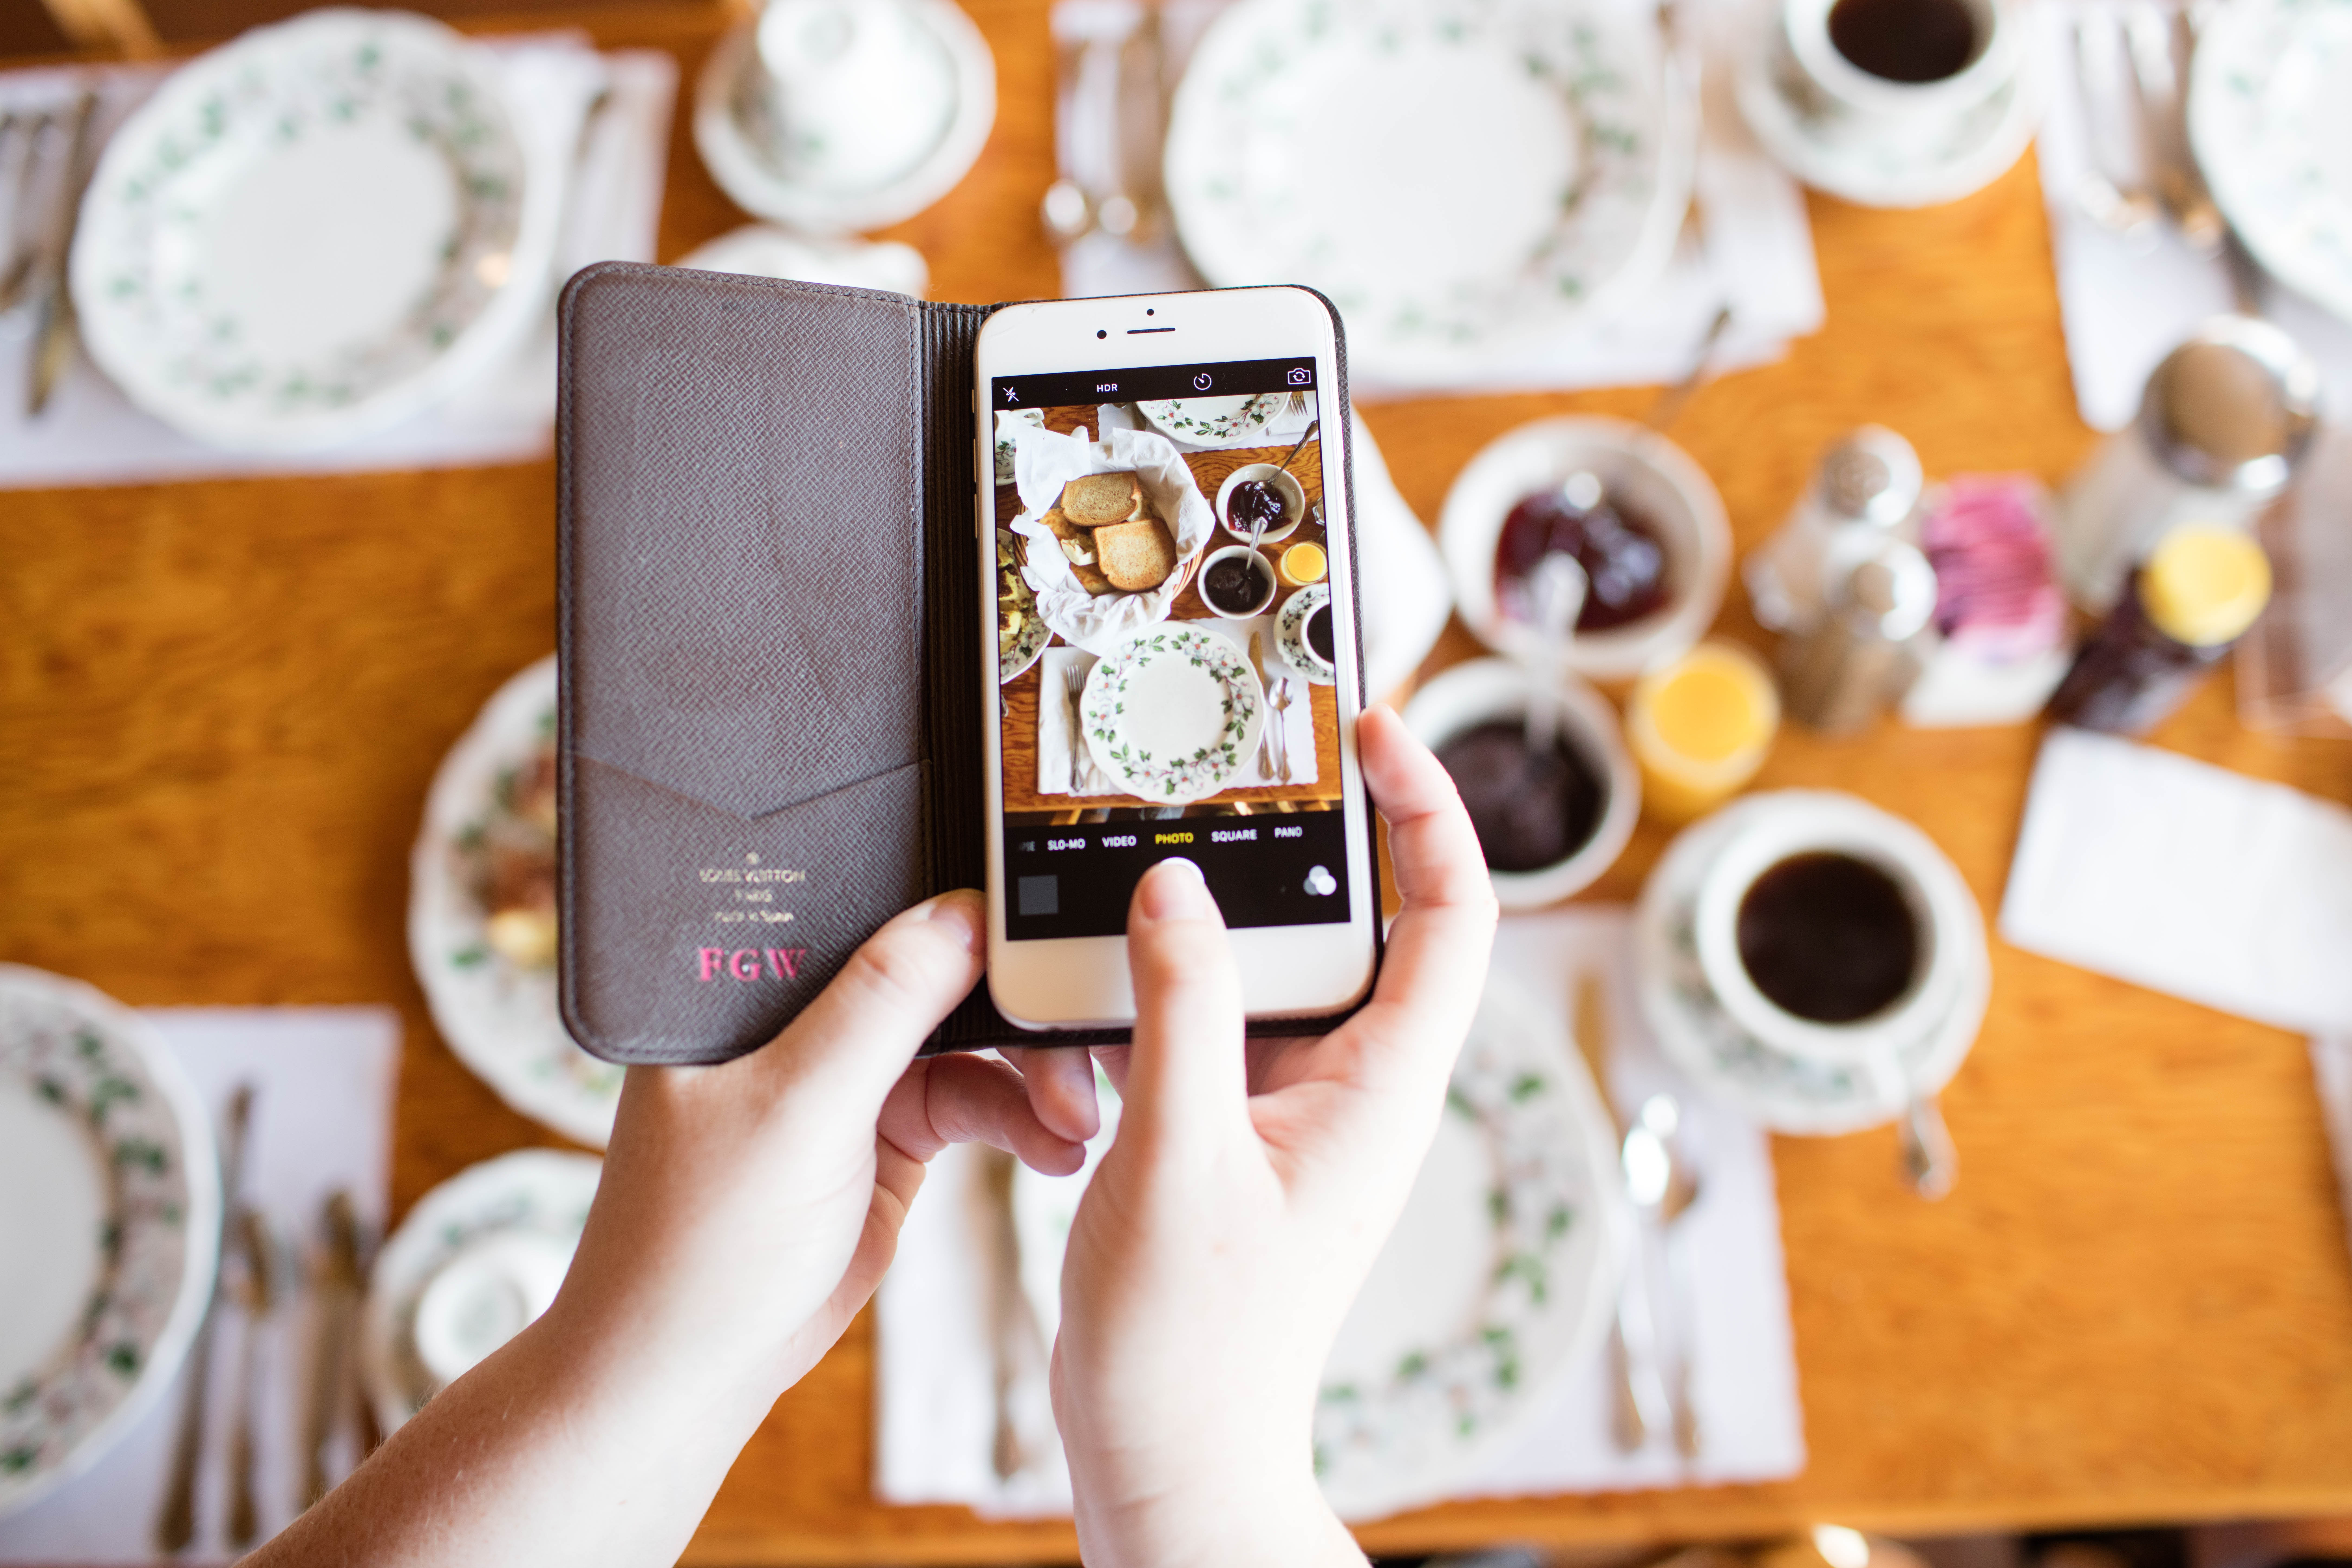 MWOA six must-have apps for iPhone photos and Instagram